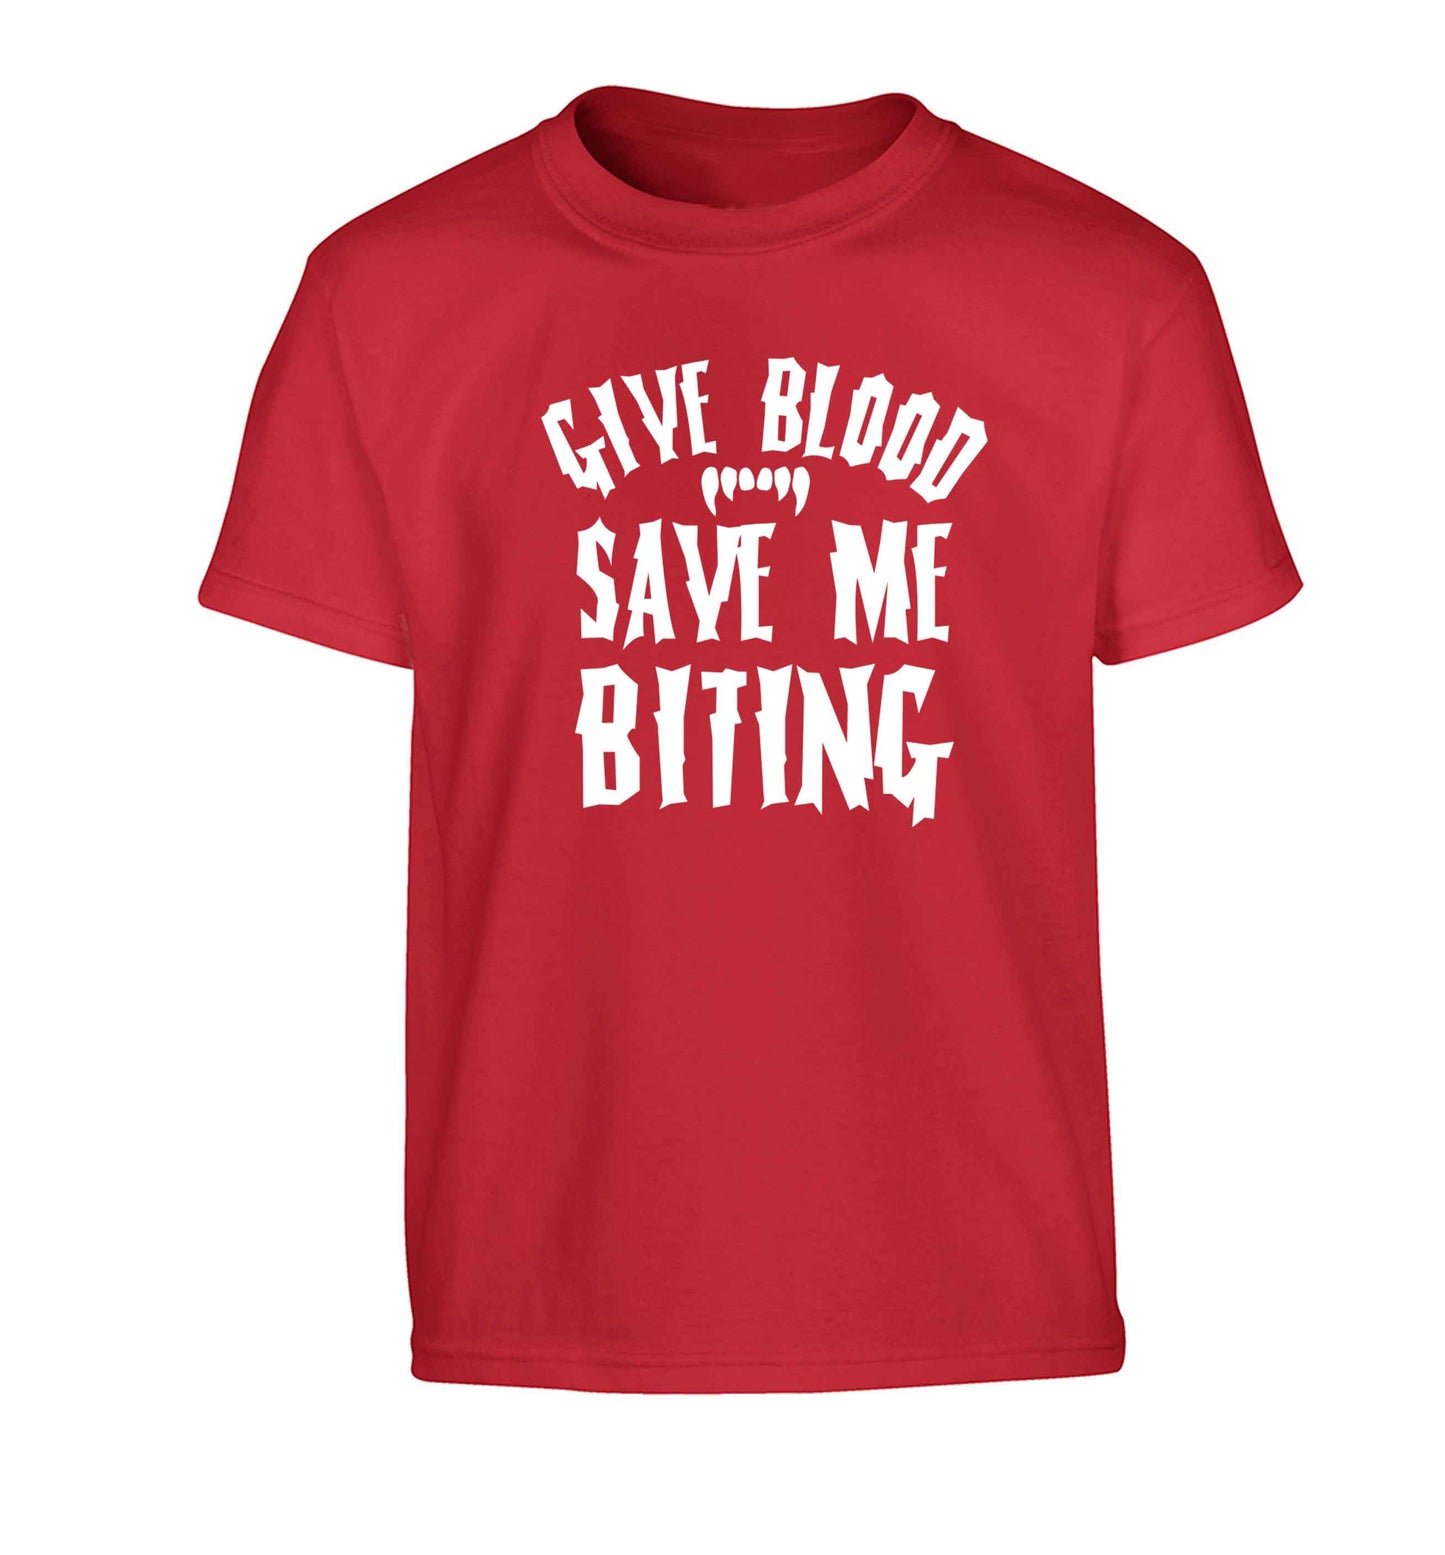 Give blood save me biting Children's red Tshirt 12-13 Years